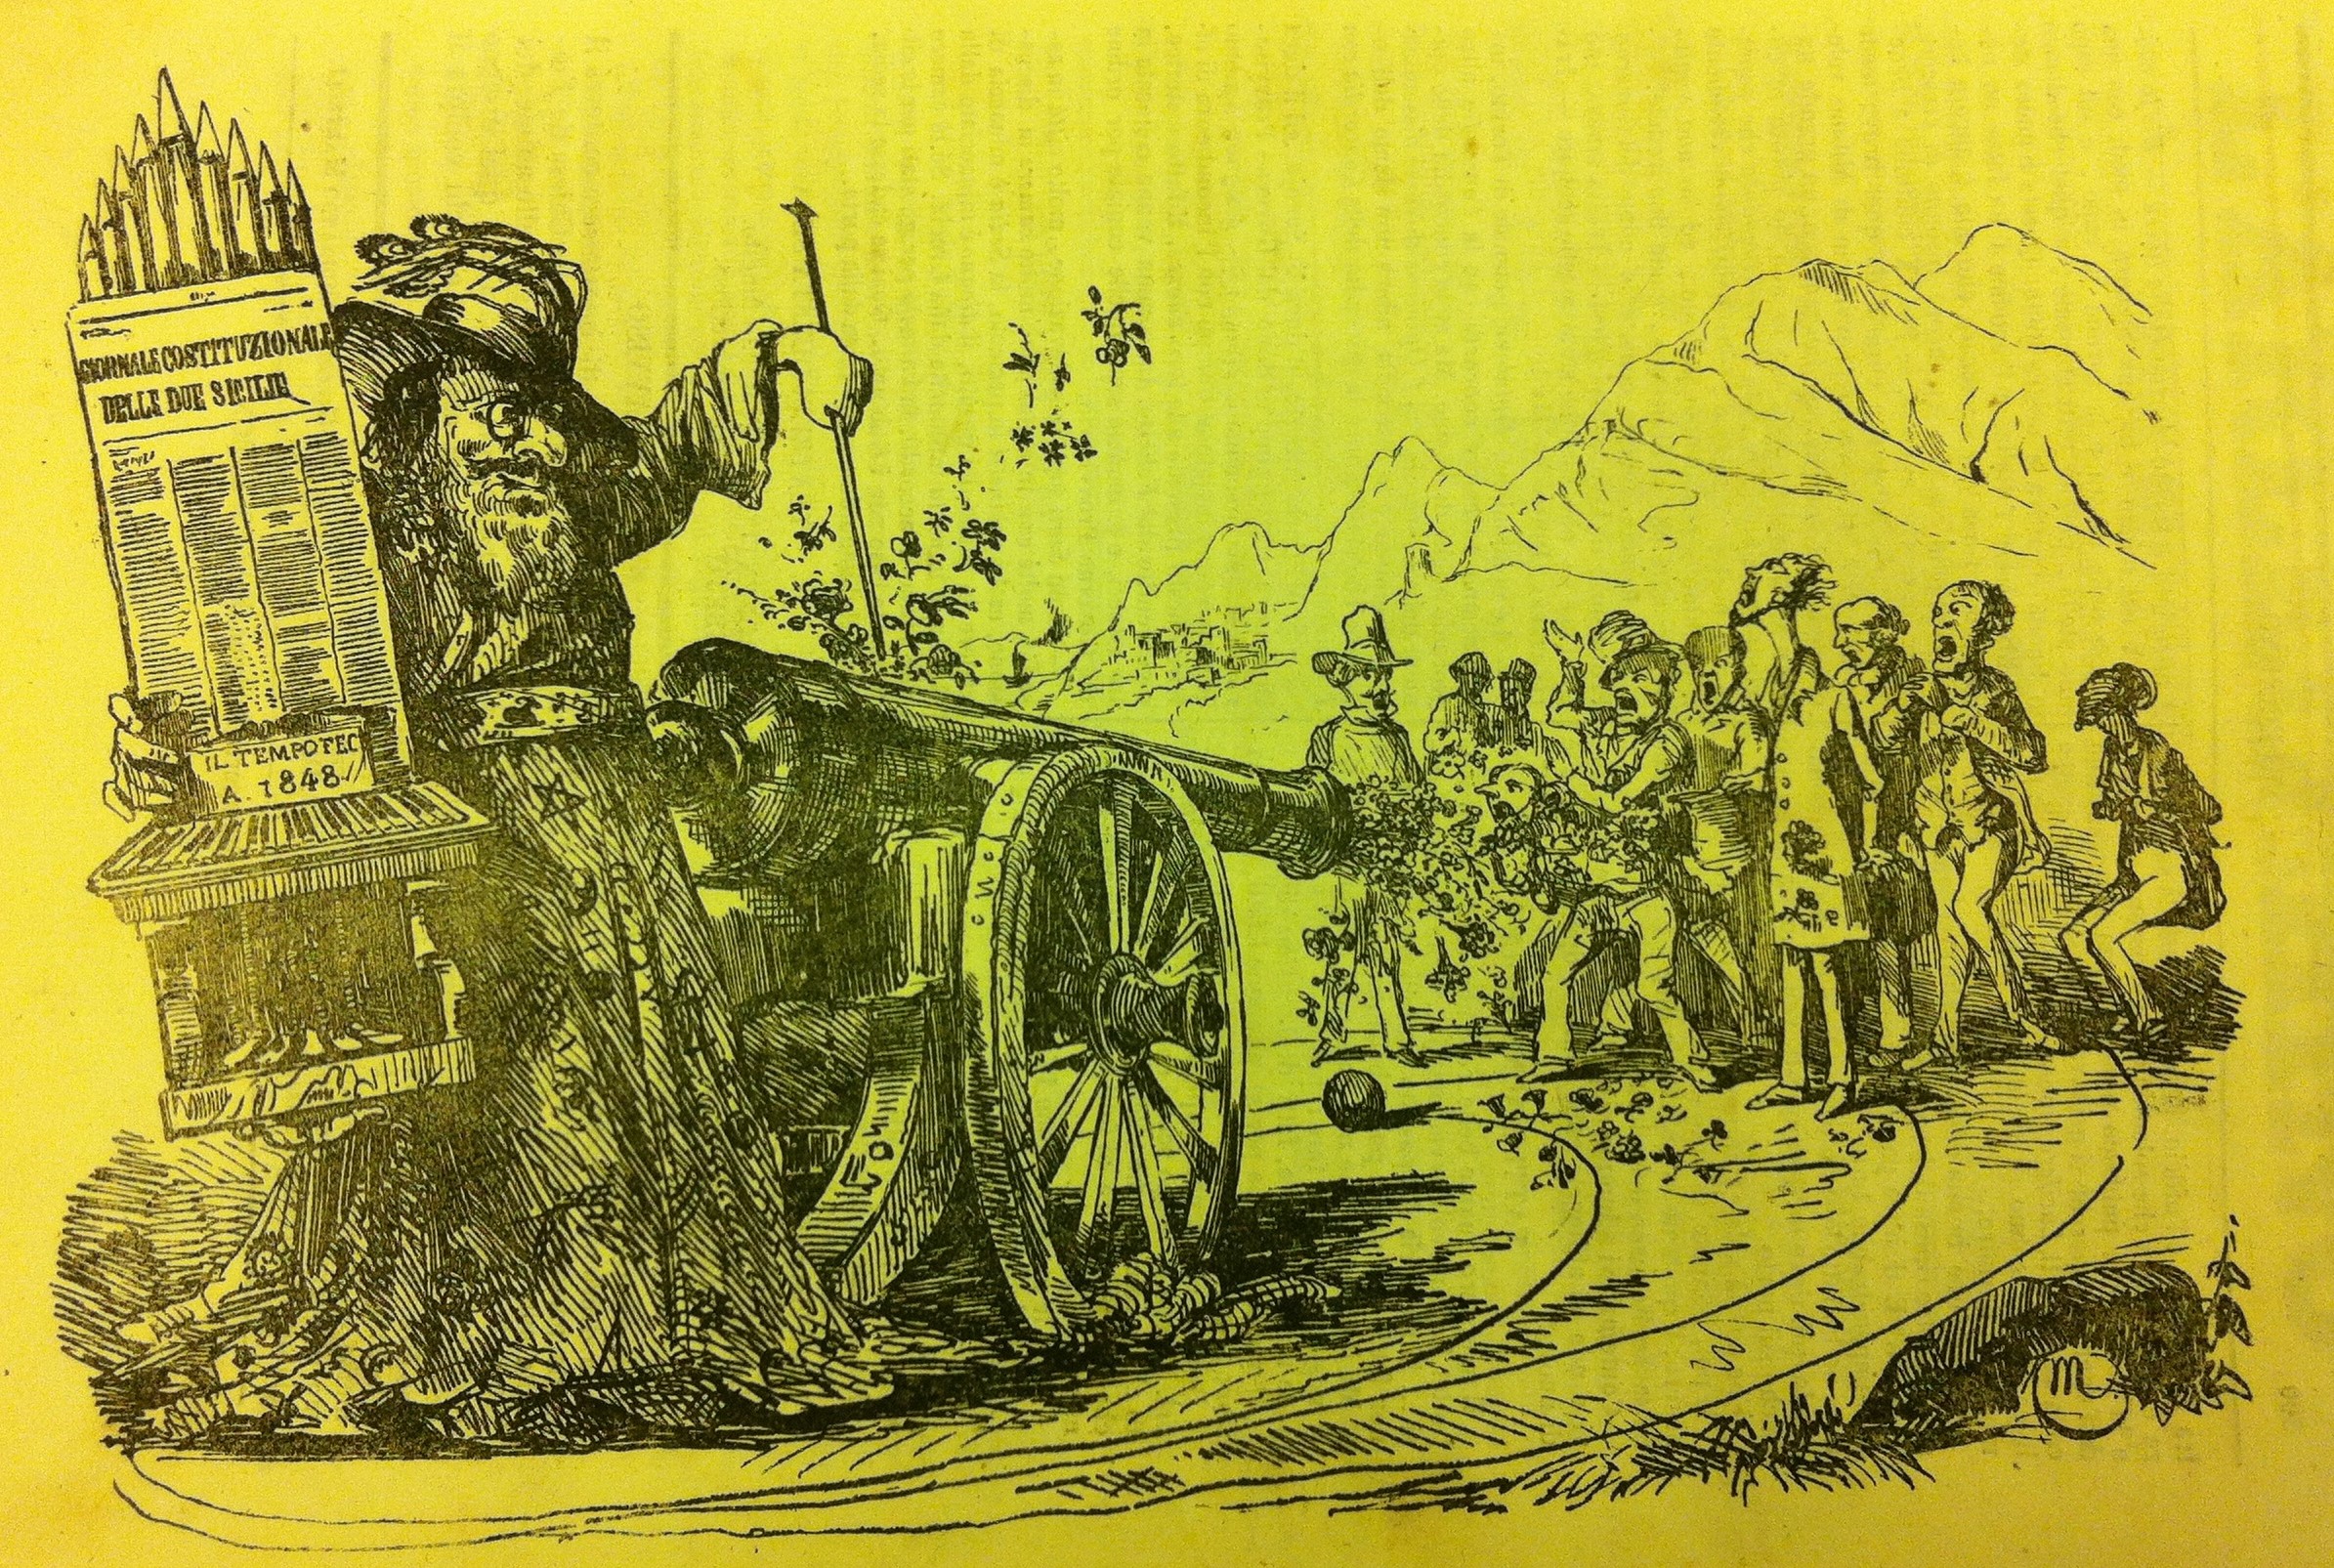 Rebel province. Radicals, popular movements and commons in the Calabrias (1820-1848).